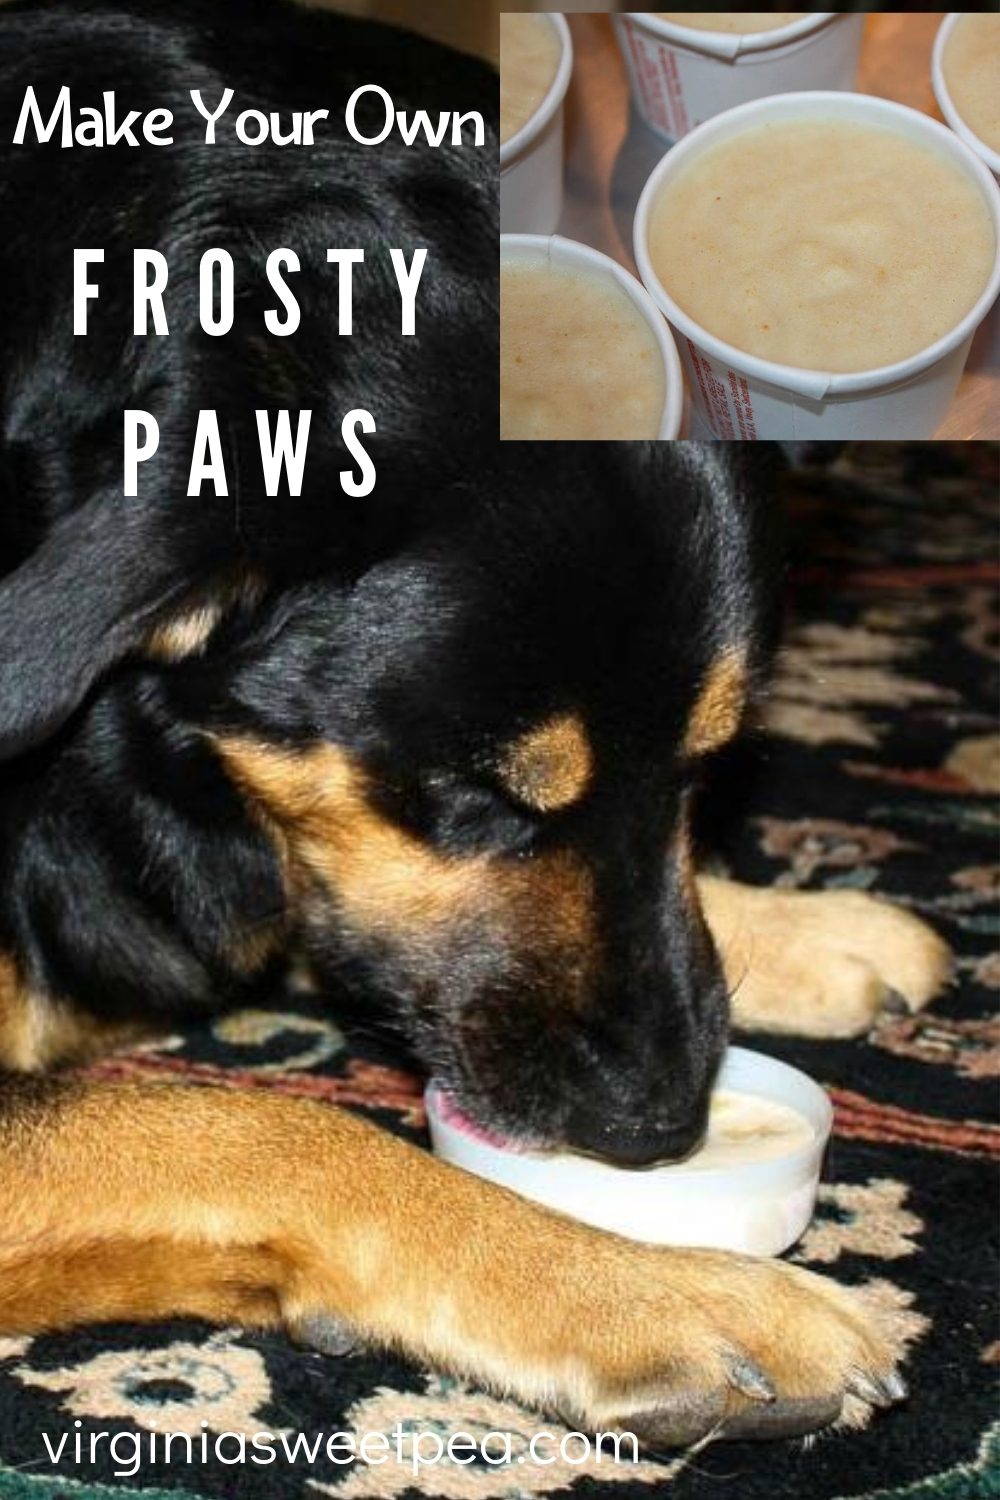 frosty paws ice cream ingredients